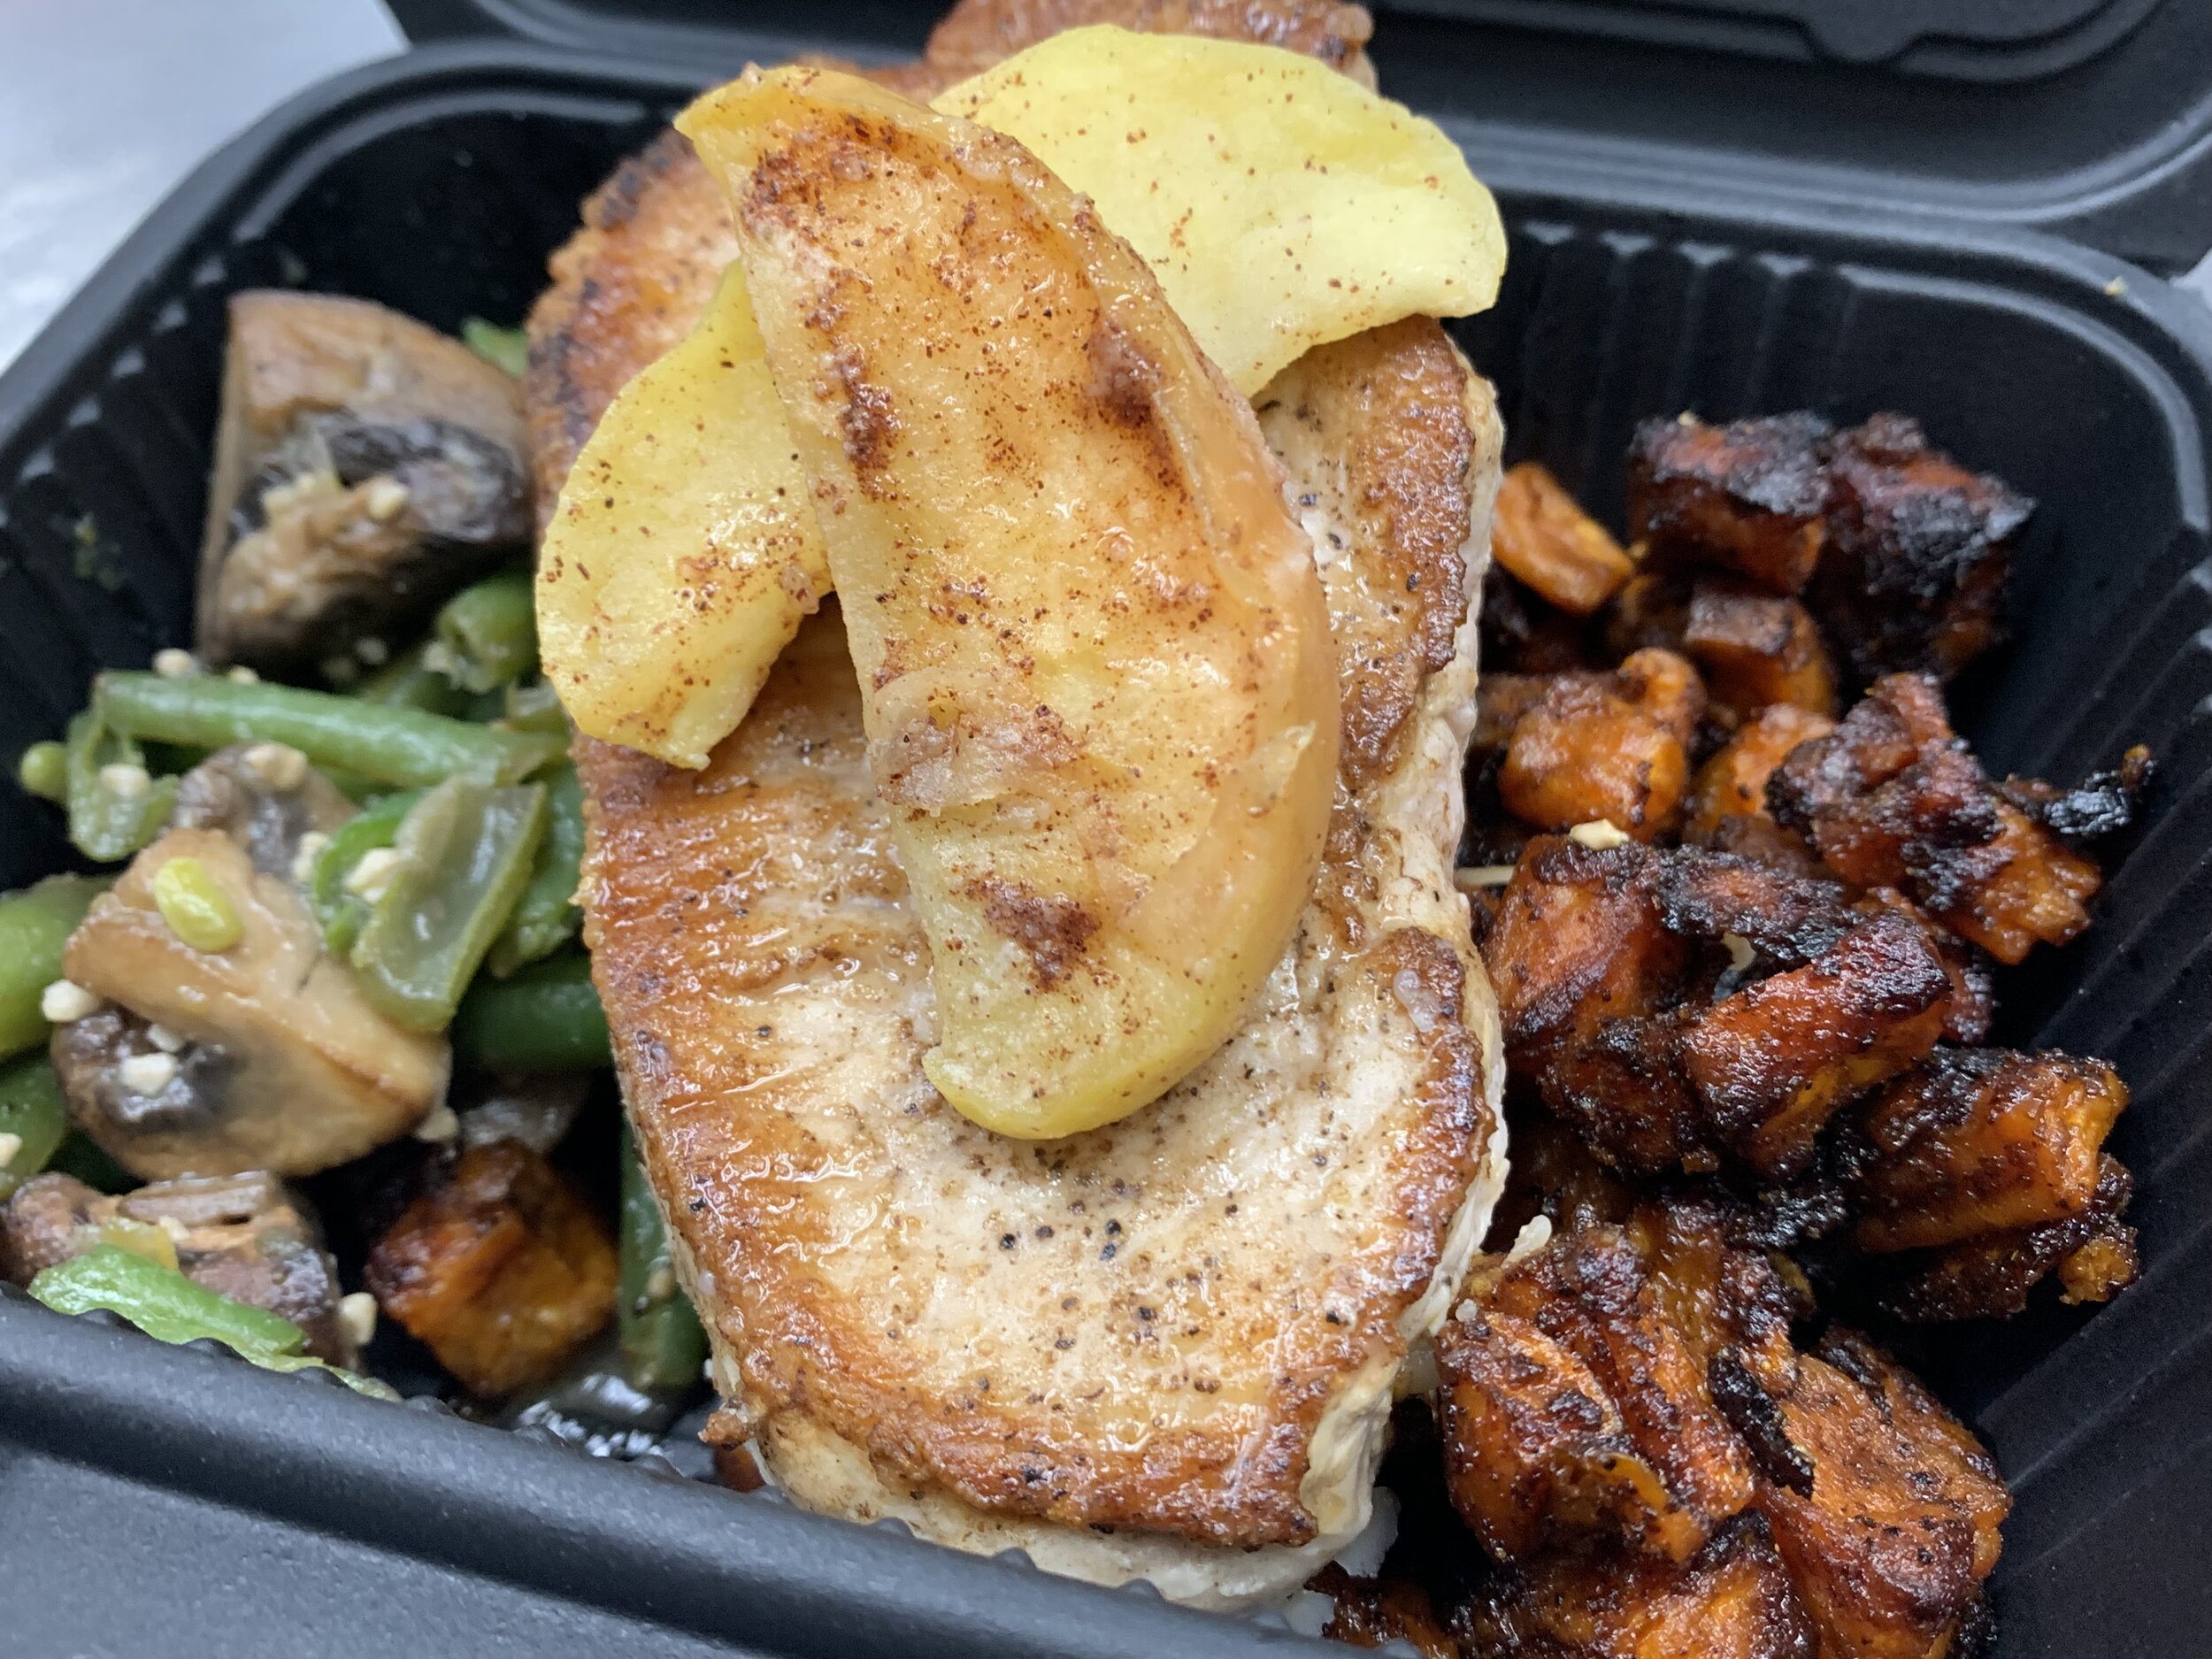 Pork Chop with Baked Apples served with Sweet and Spicy Roasted Sweet Potatoes